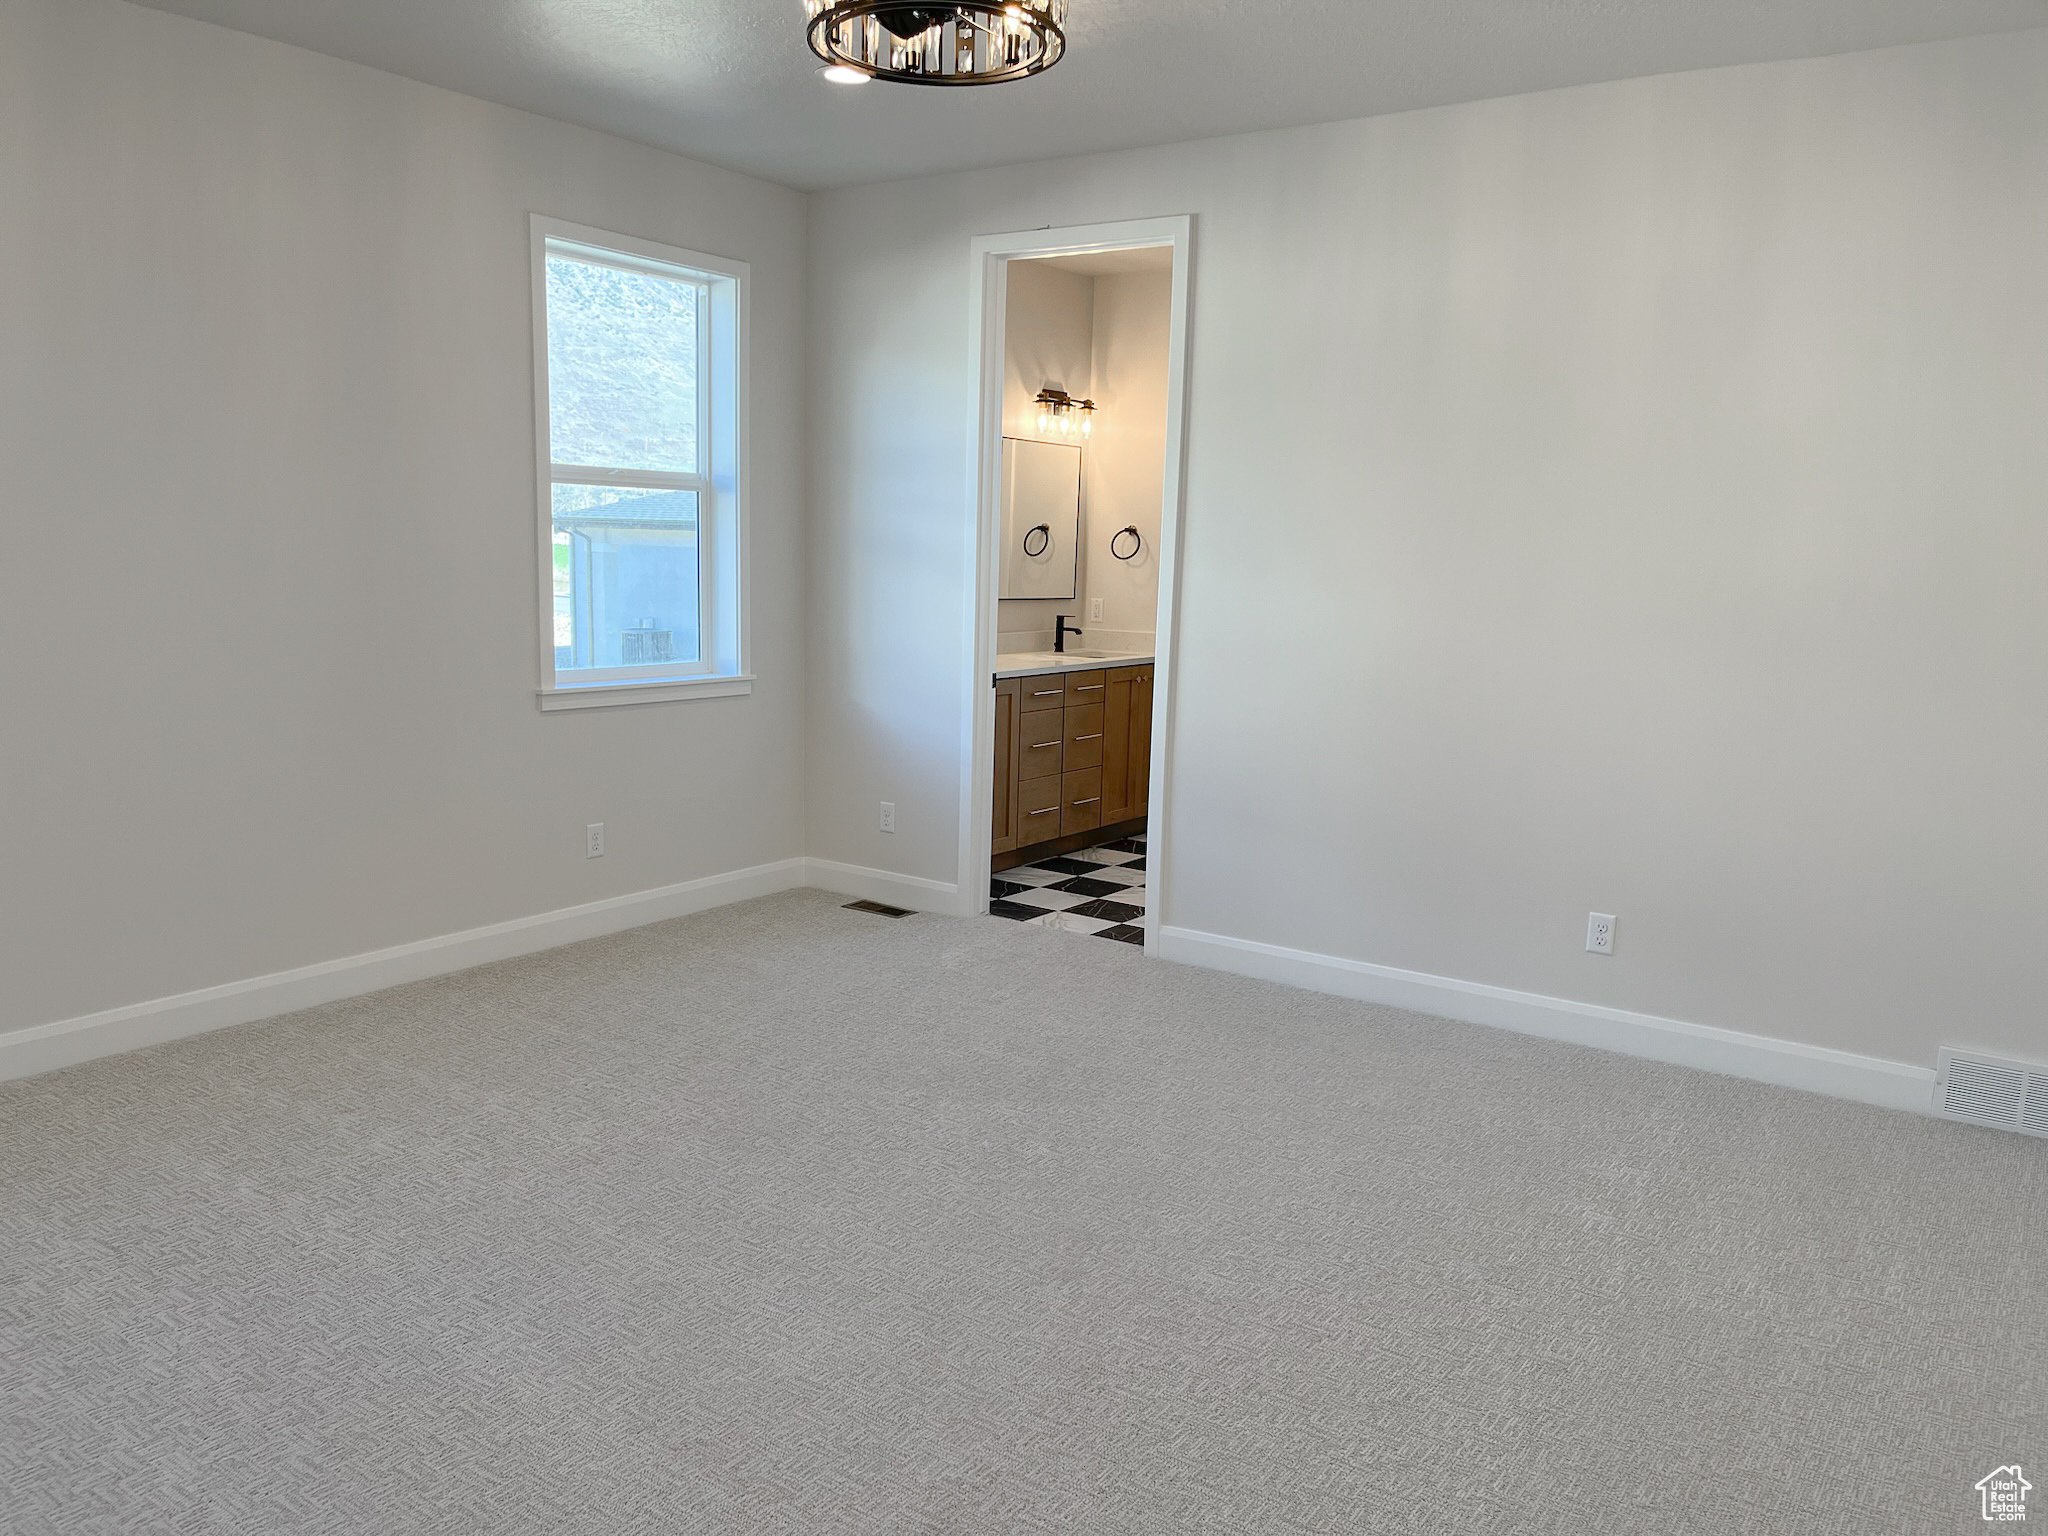 Interior space with ensuite bath and light carpet